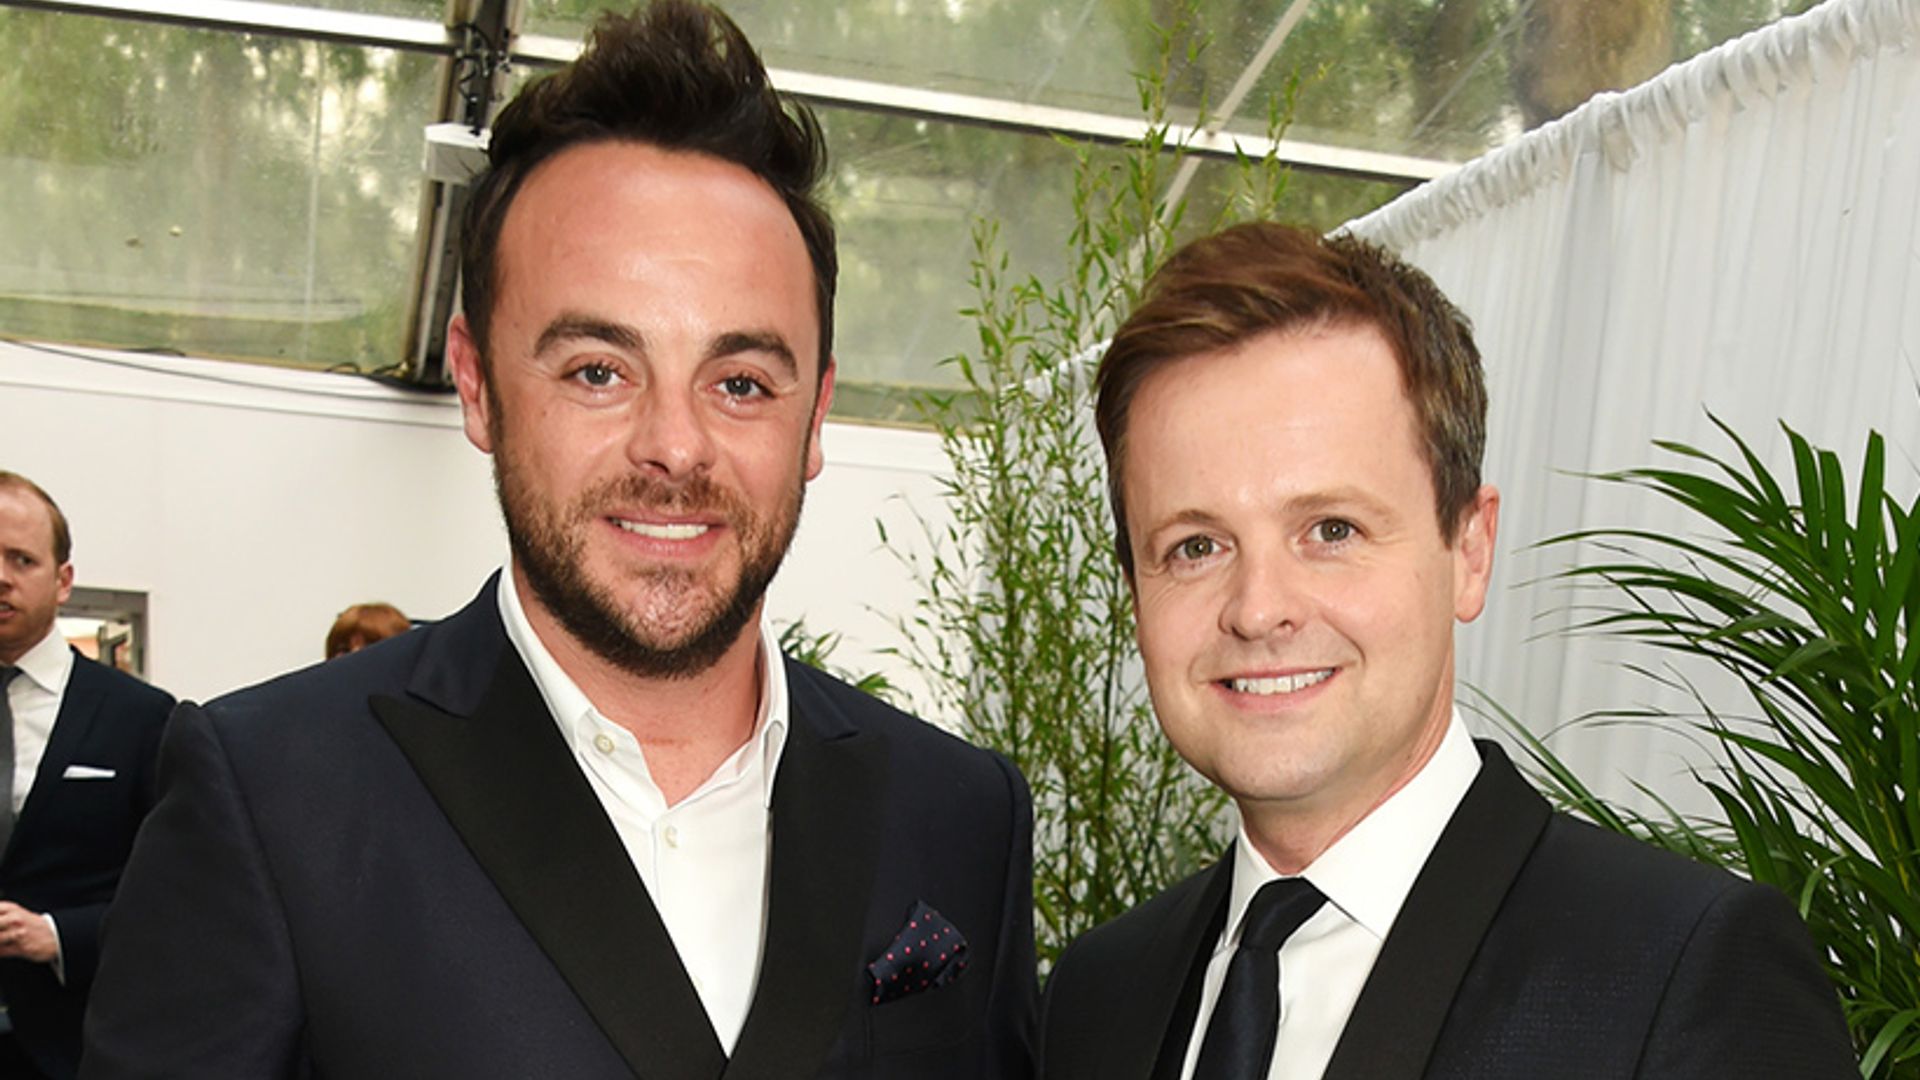 Ant McPartlin confirms he will not return to work until 2019